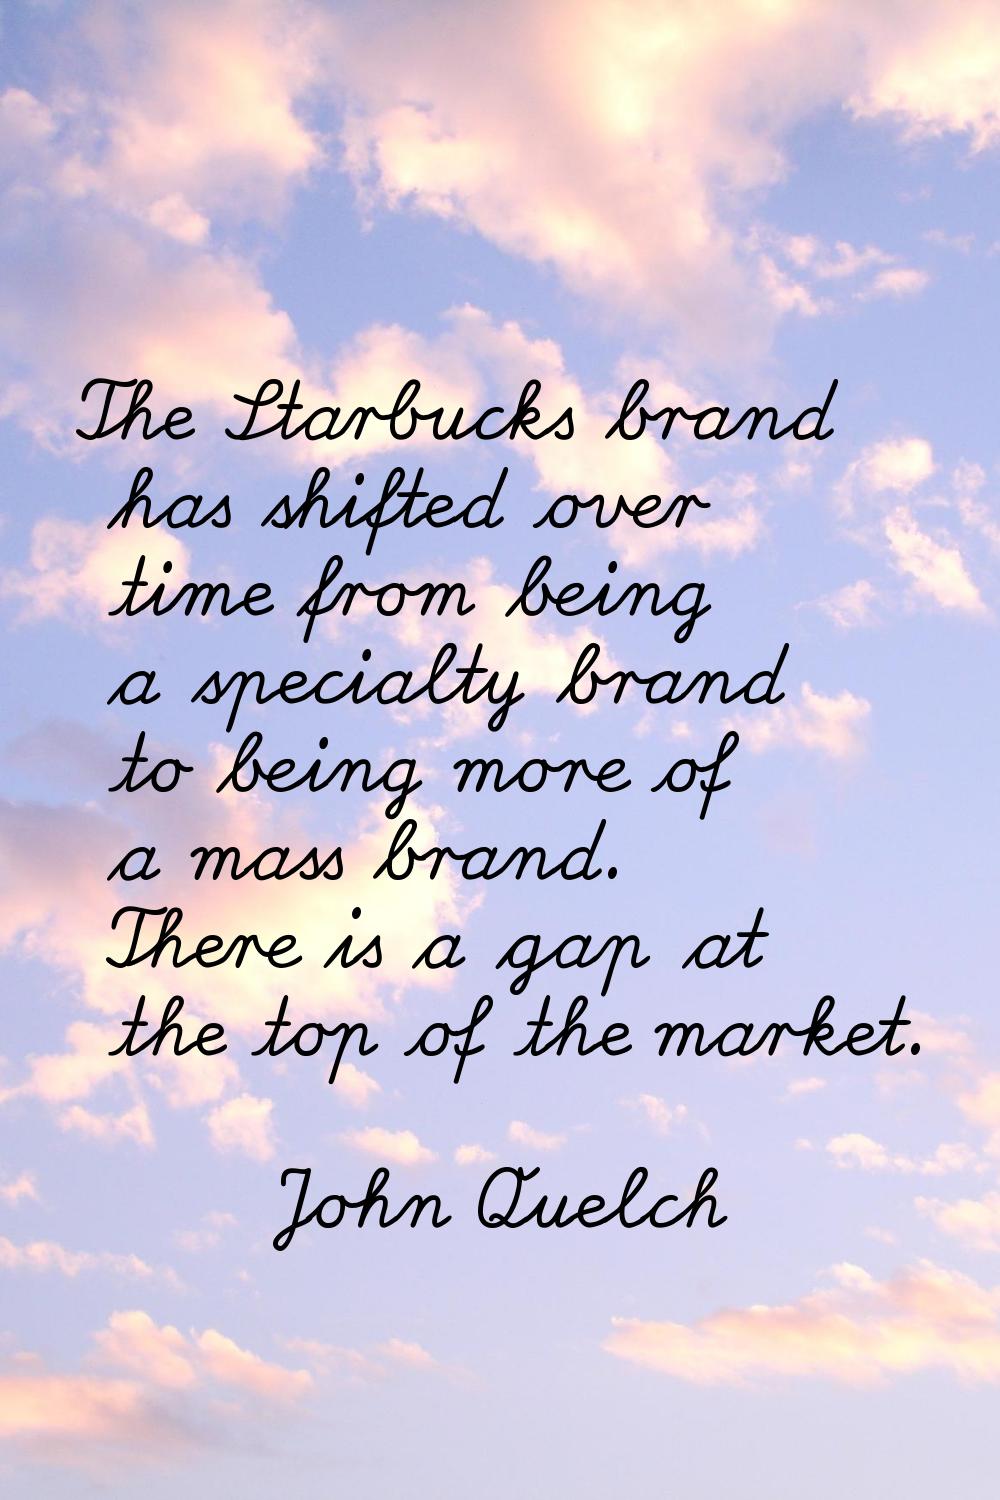 The Starbucks brand has shifted over time from being a specialty brand to being more of a mass bran